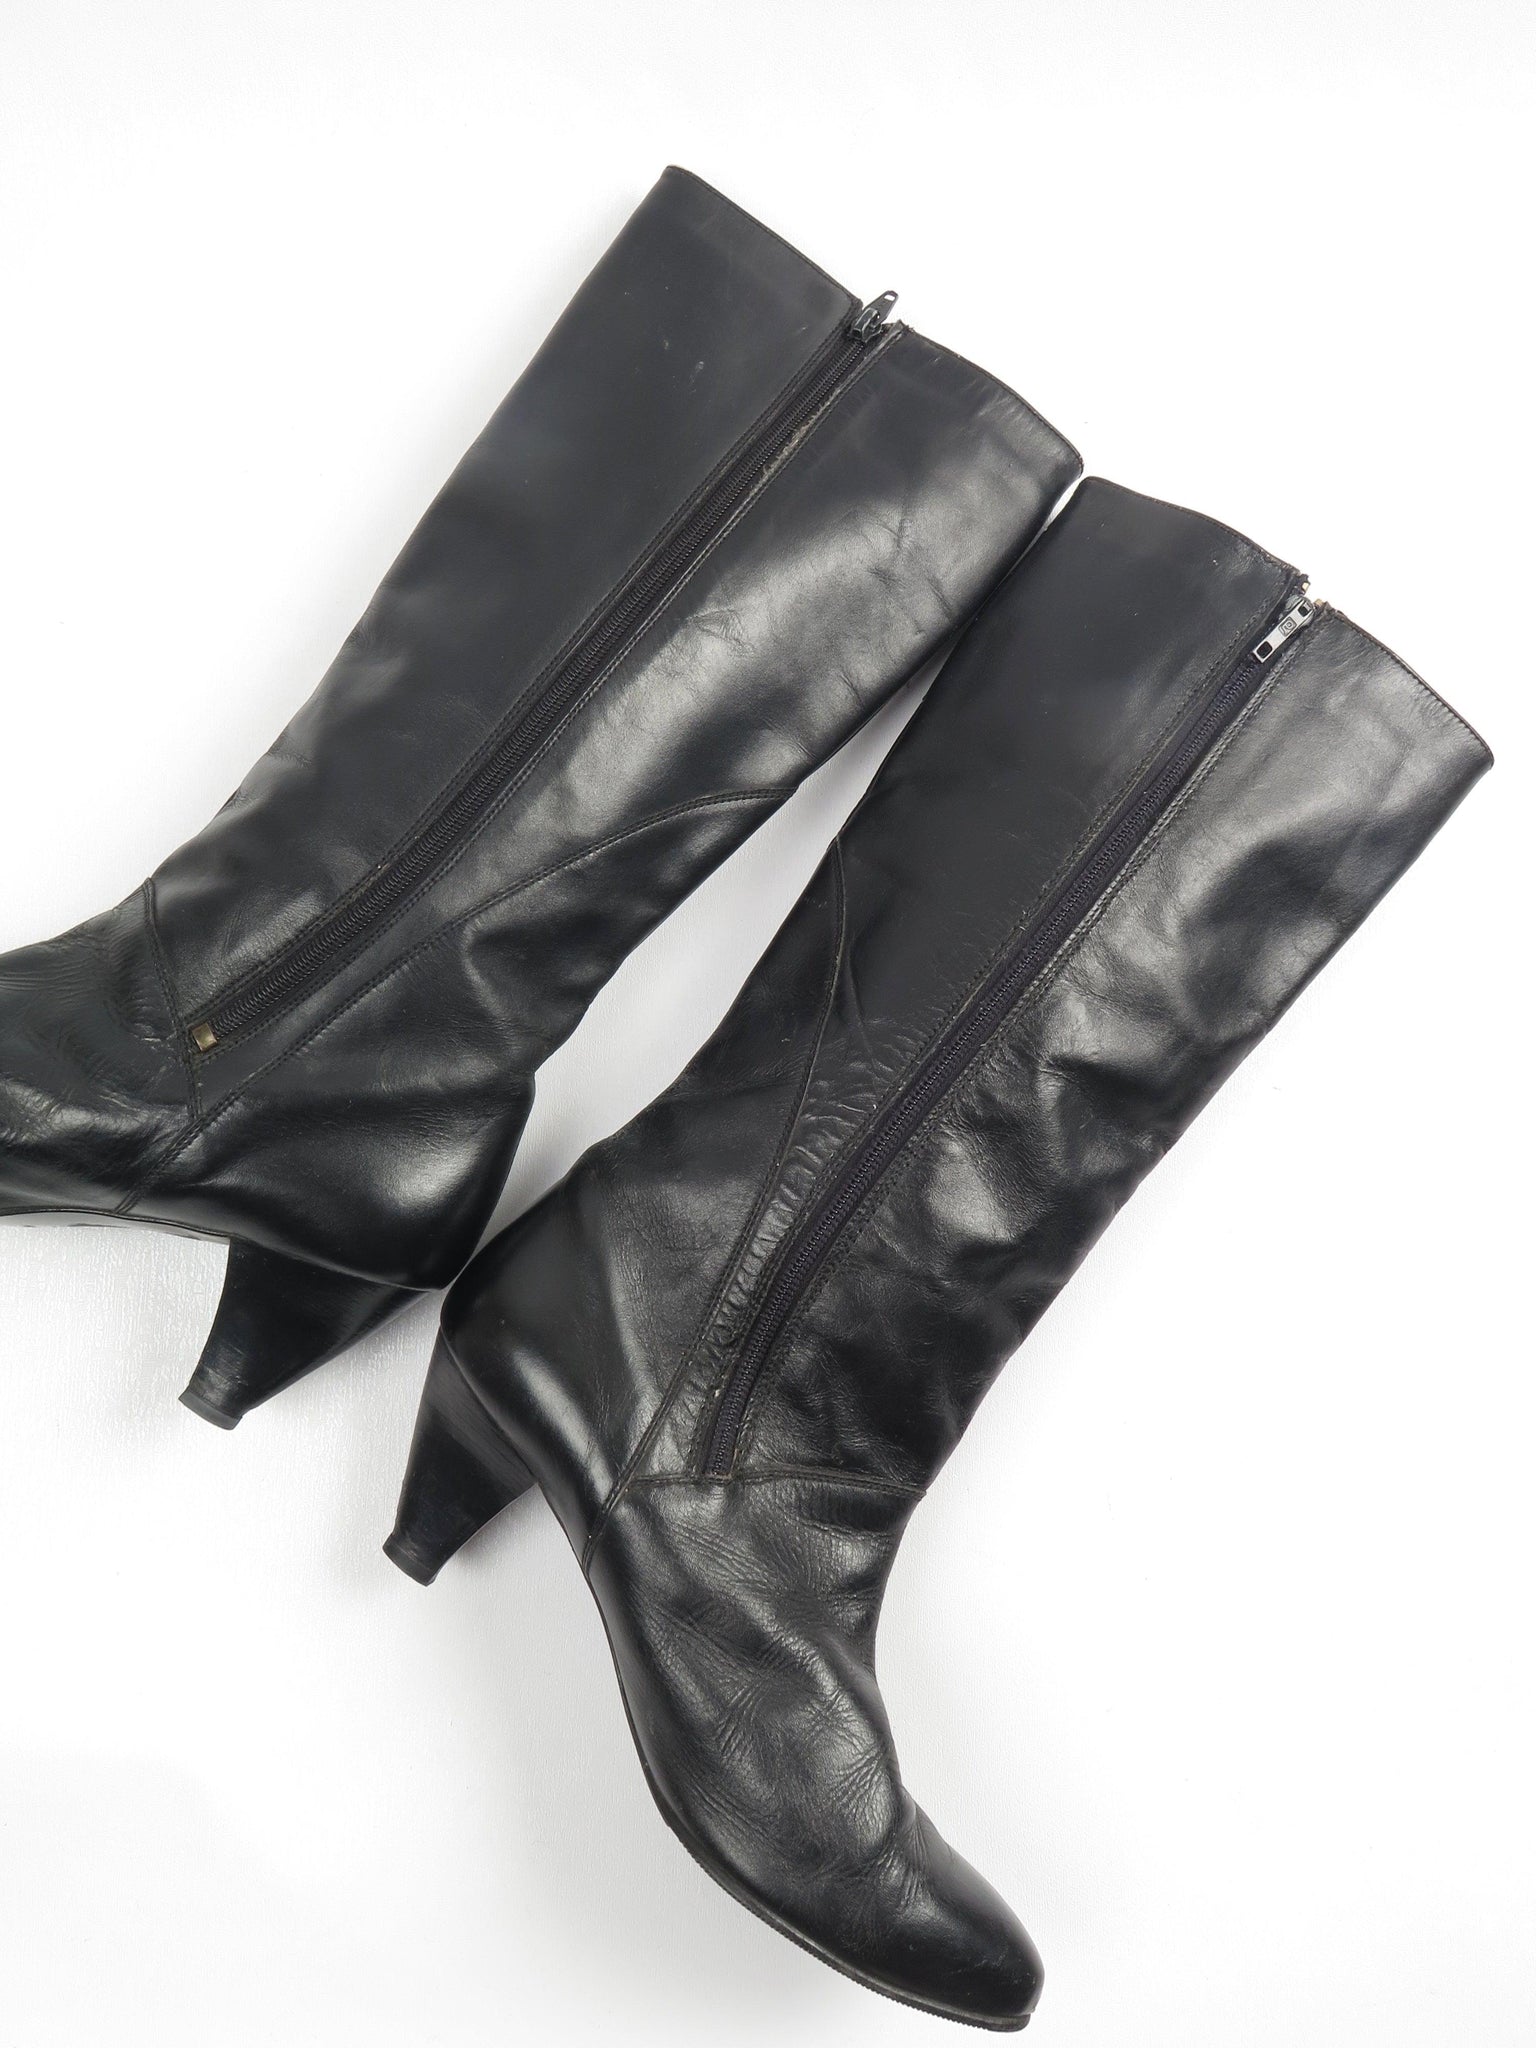 Long Black 1970s Leather Boots 39/6 - The Harlequin